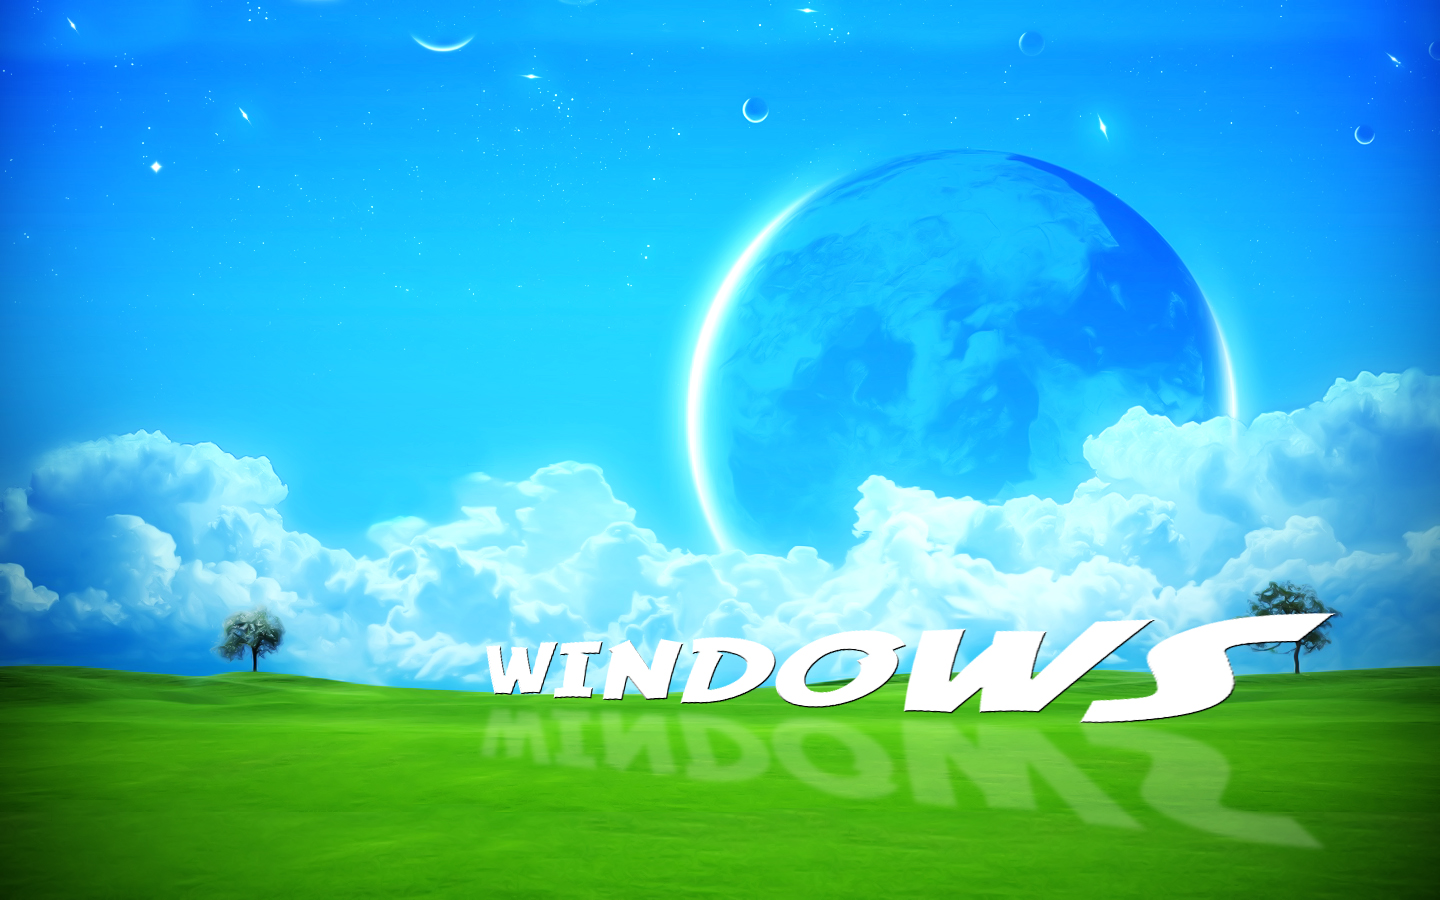 Animated Dolphin Wallpaper For Windows 7 Animated Dolphin Wallpaper